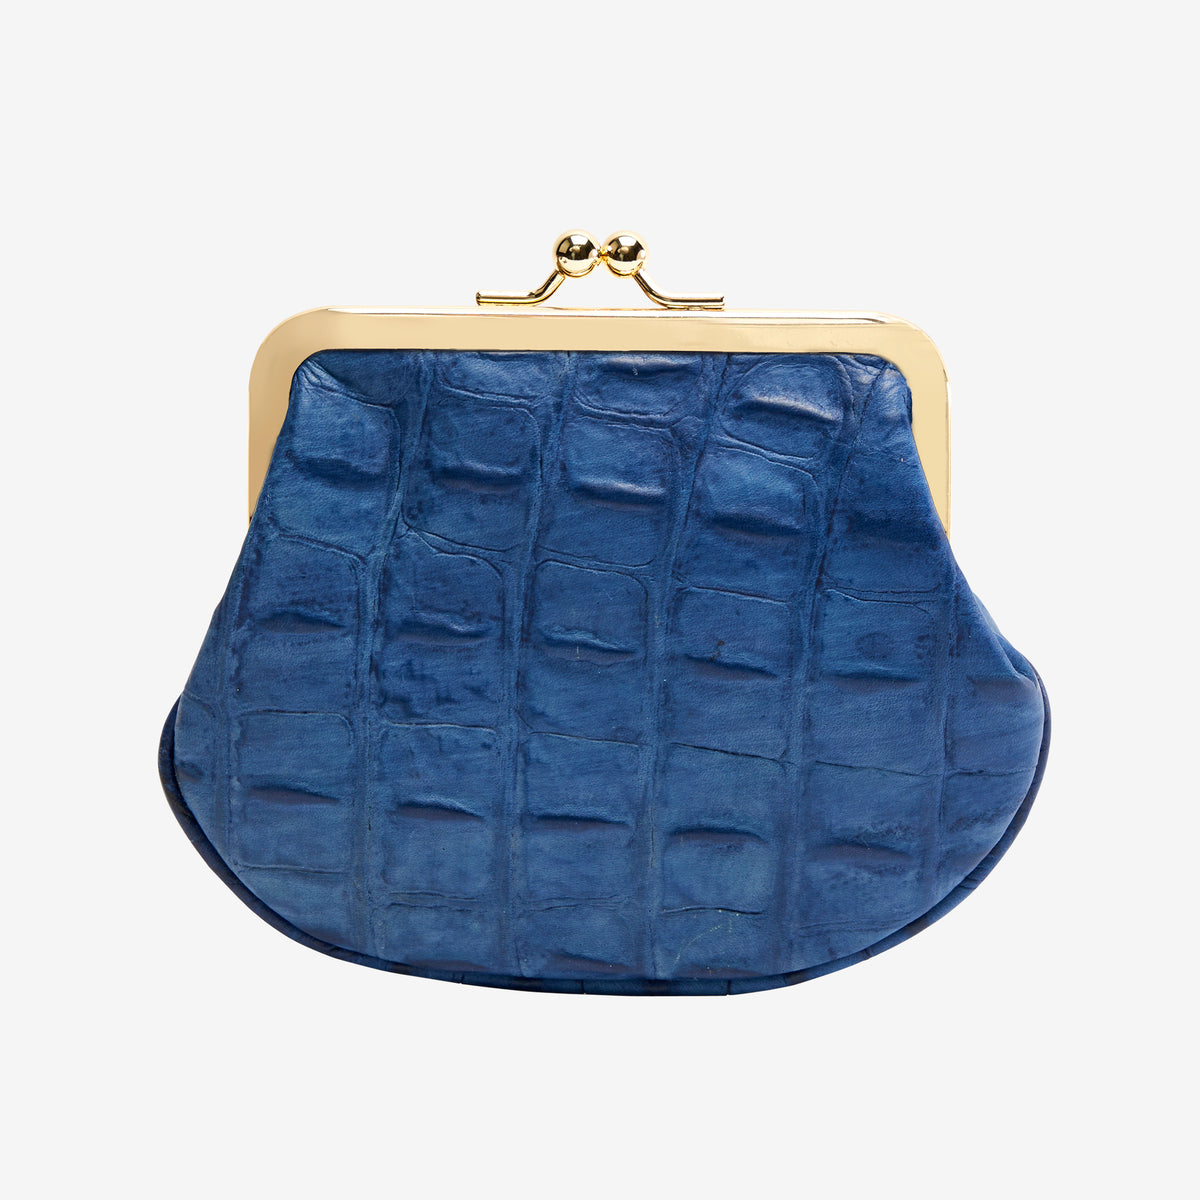    tusk-468-womens-croco-embossed-leather-framed-coin-purse-navy-front